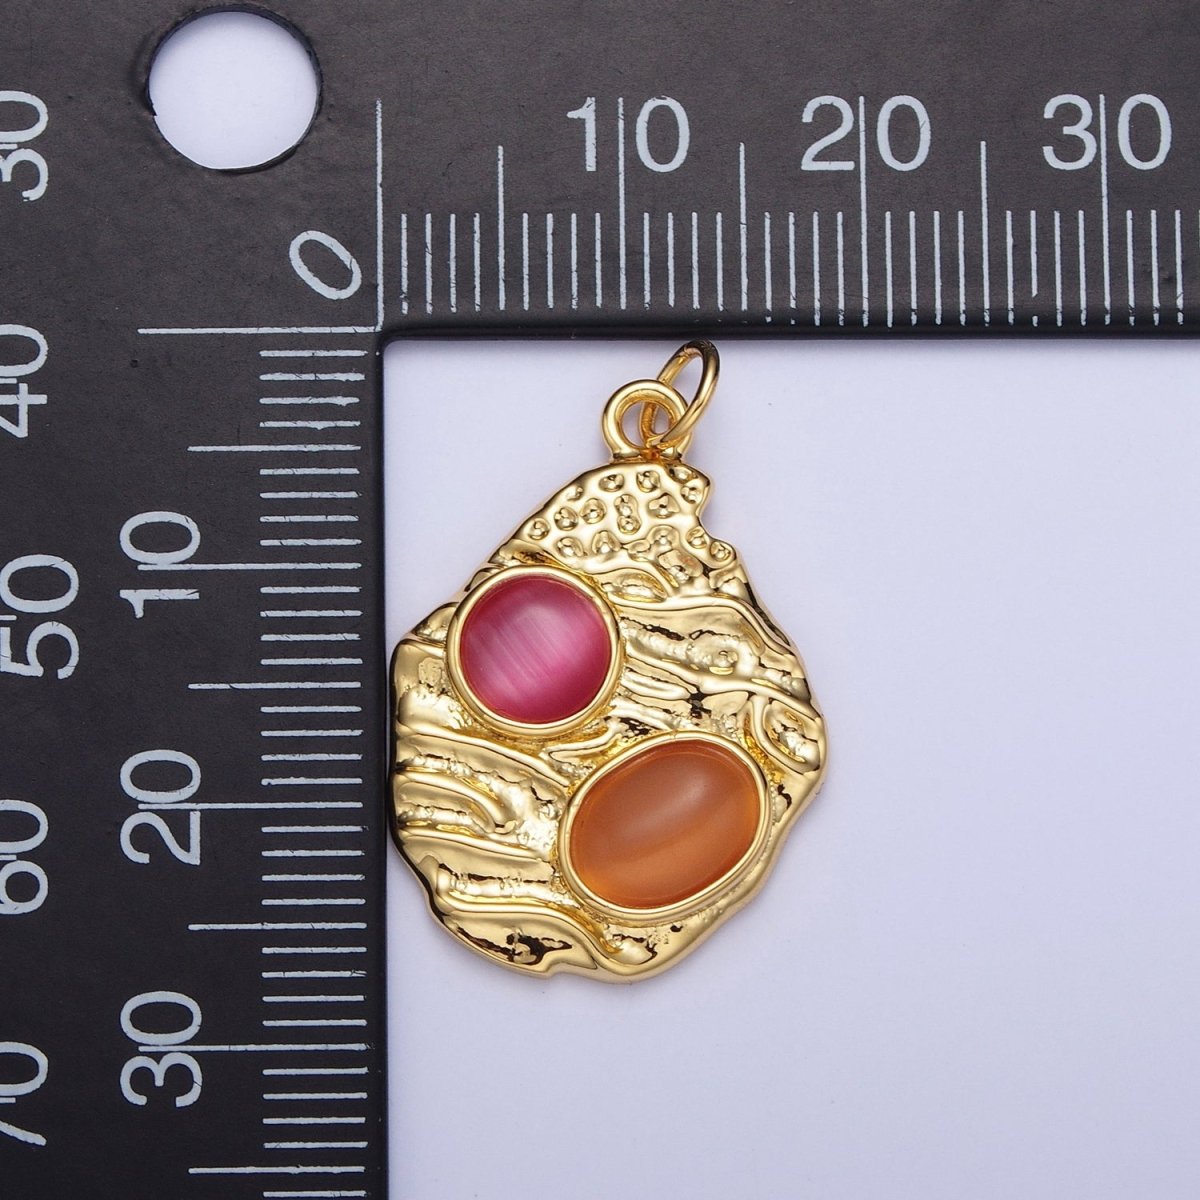 Abstract Textured Gold Charm with Pink Orange Cabochon Cat's Eye Gemstones Charm For Jewelry Making | X-747 - DLUXCA